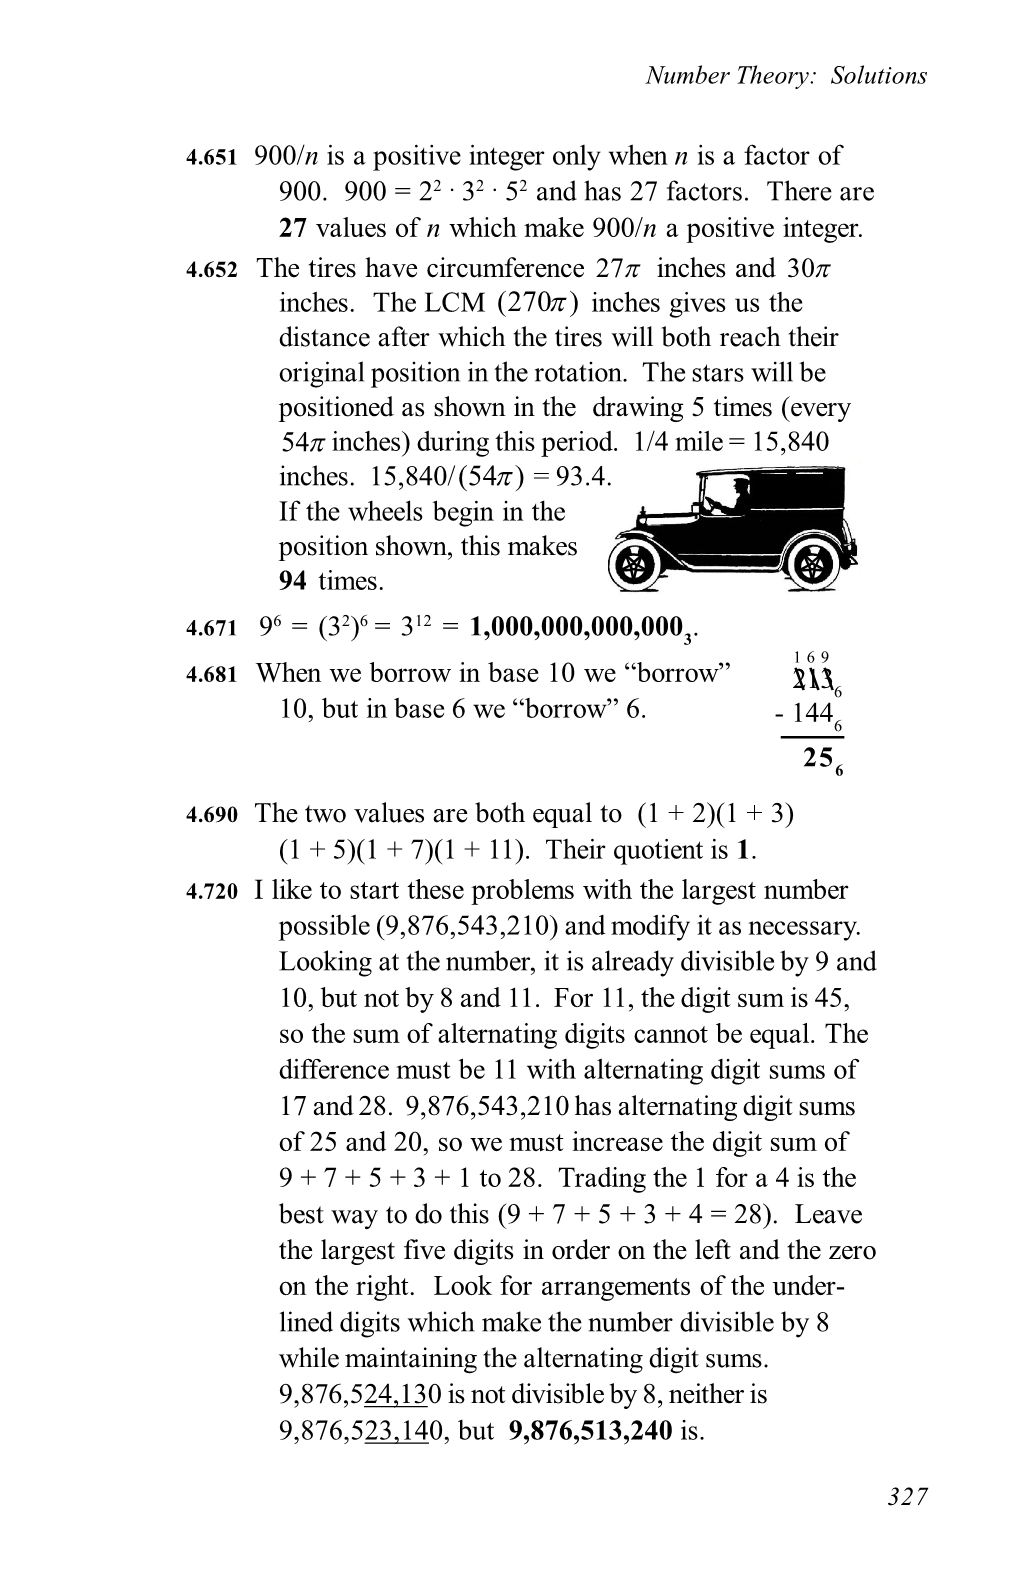 Sample of Solutions Pages